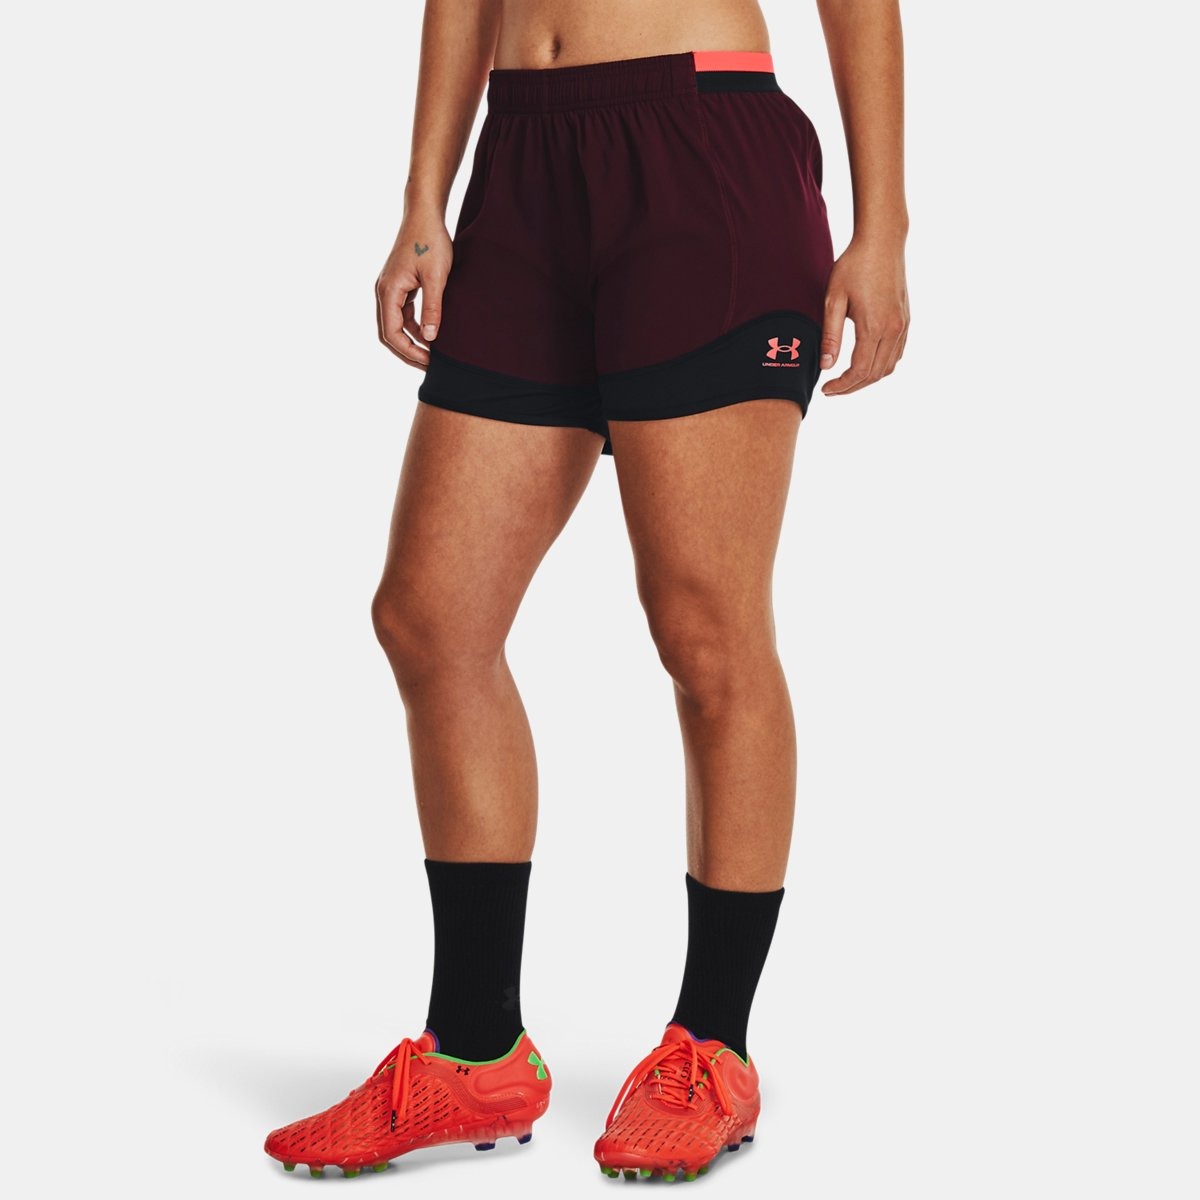 Woman Shorts Burgundy by Under Armour GOOFASH